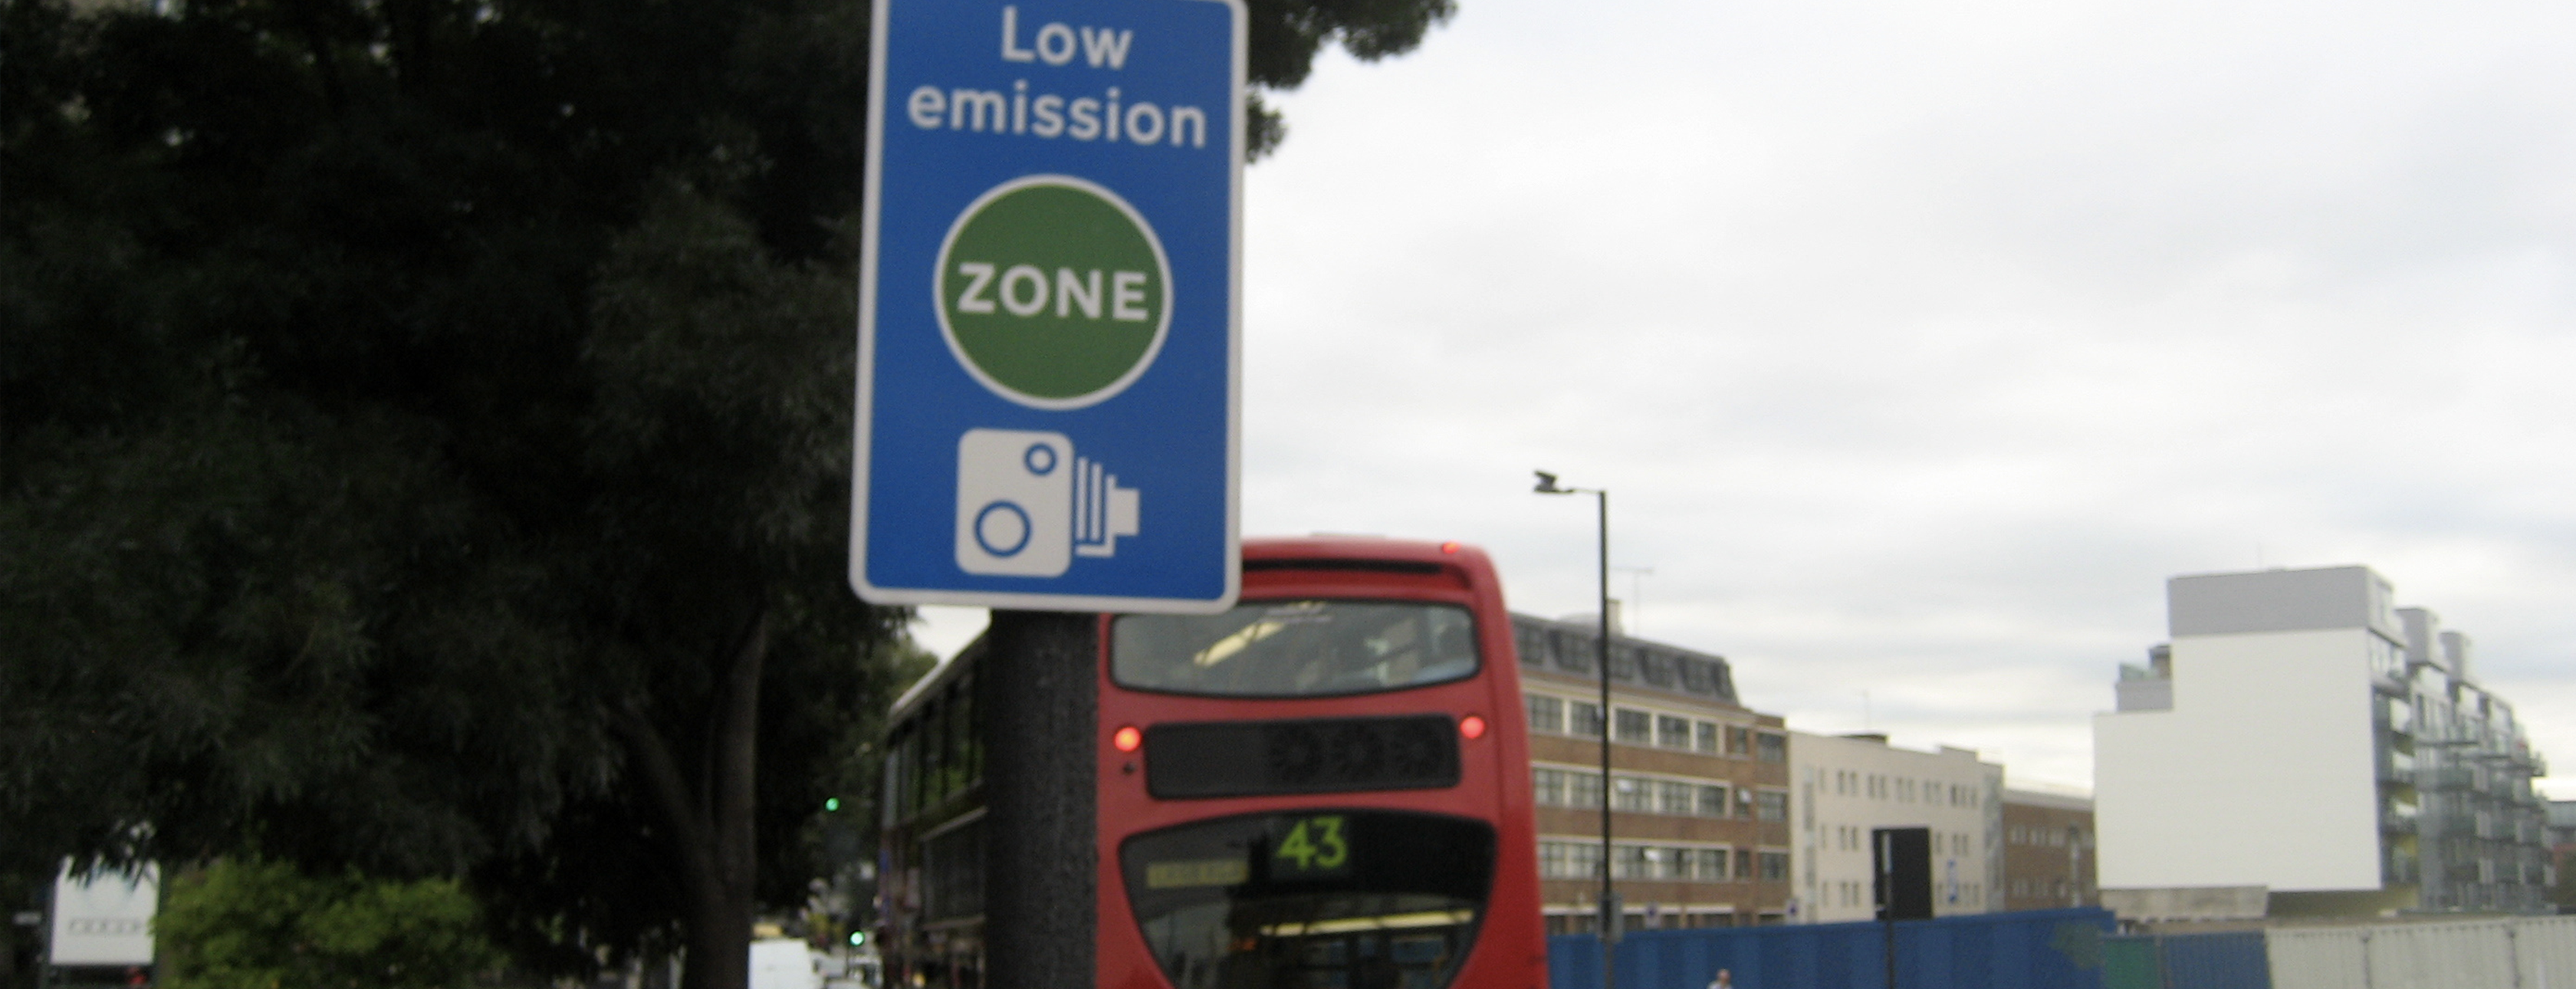 The Mayor’s Ultra Low Emission Zone for London